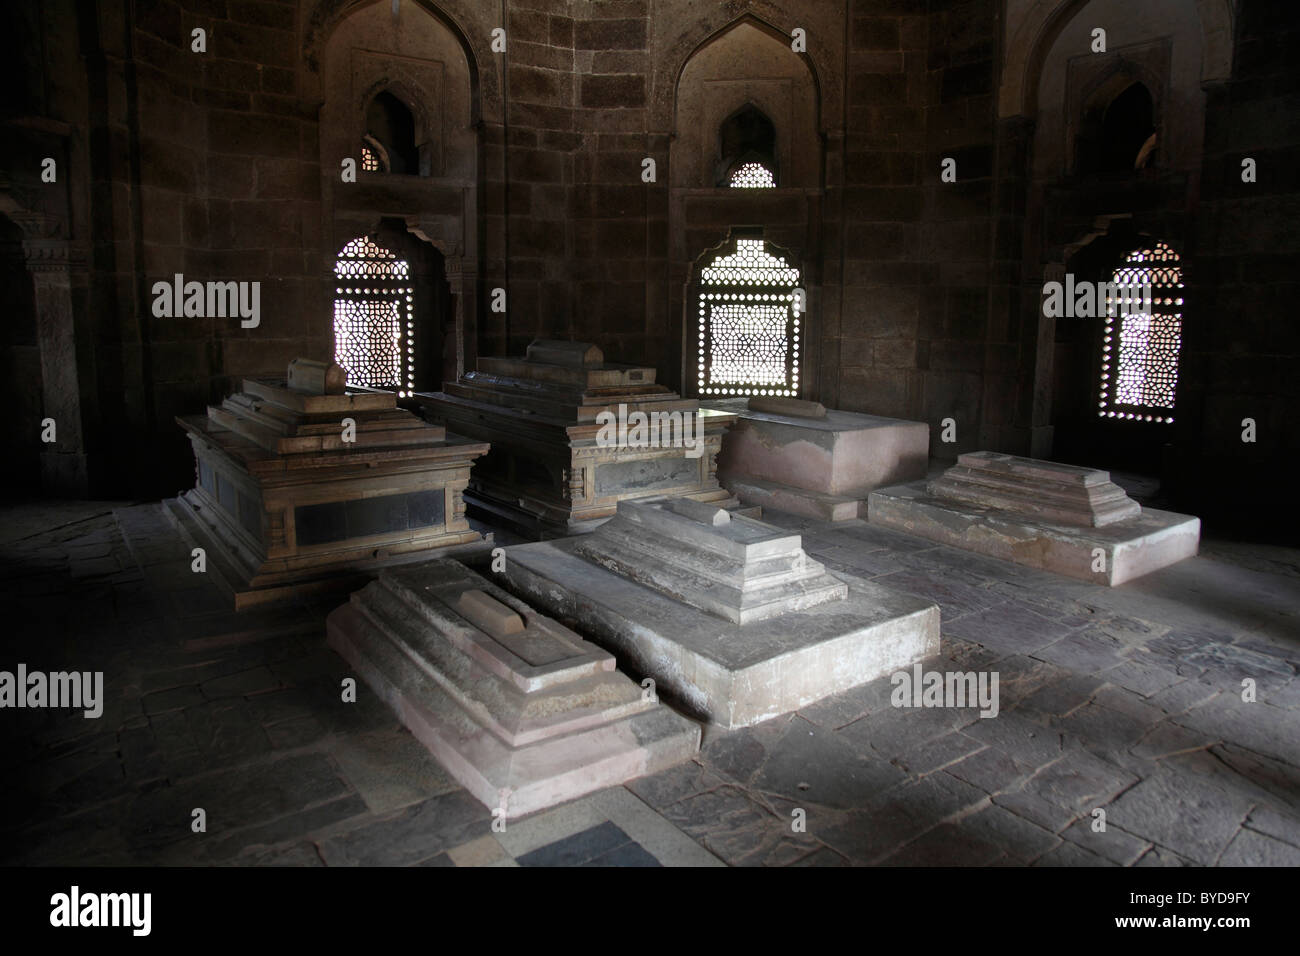 Isa Khan's Tomb, Humayun's Tomb, burial place of Muhammad Nasiruddin Humayun, second ruler of the Mughal Empire in India Stock Photo